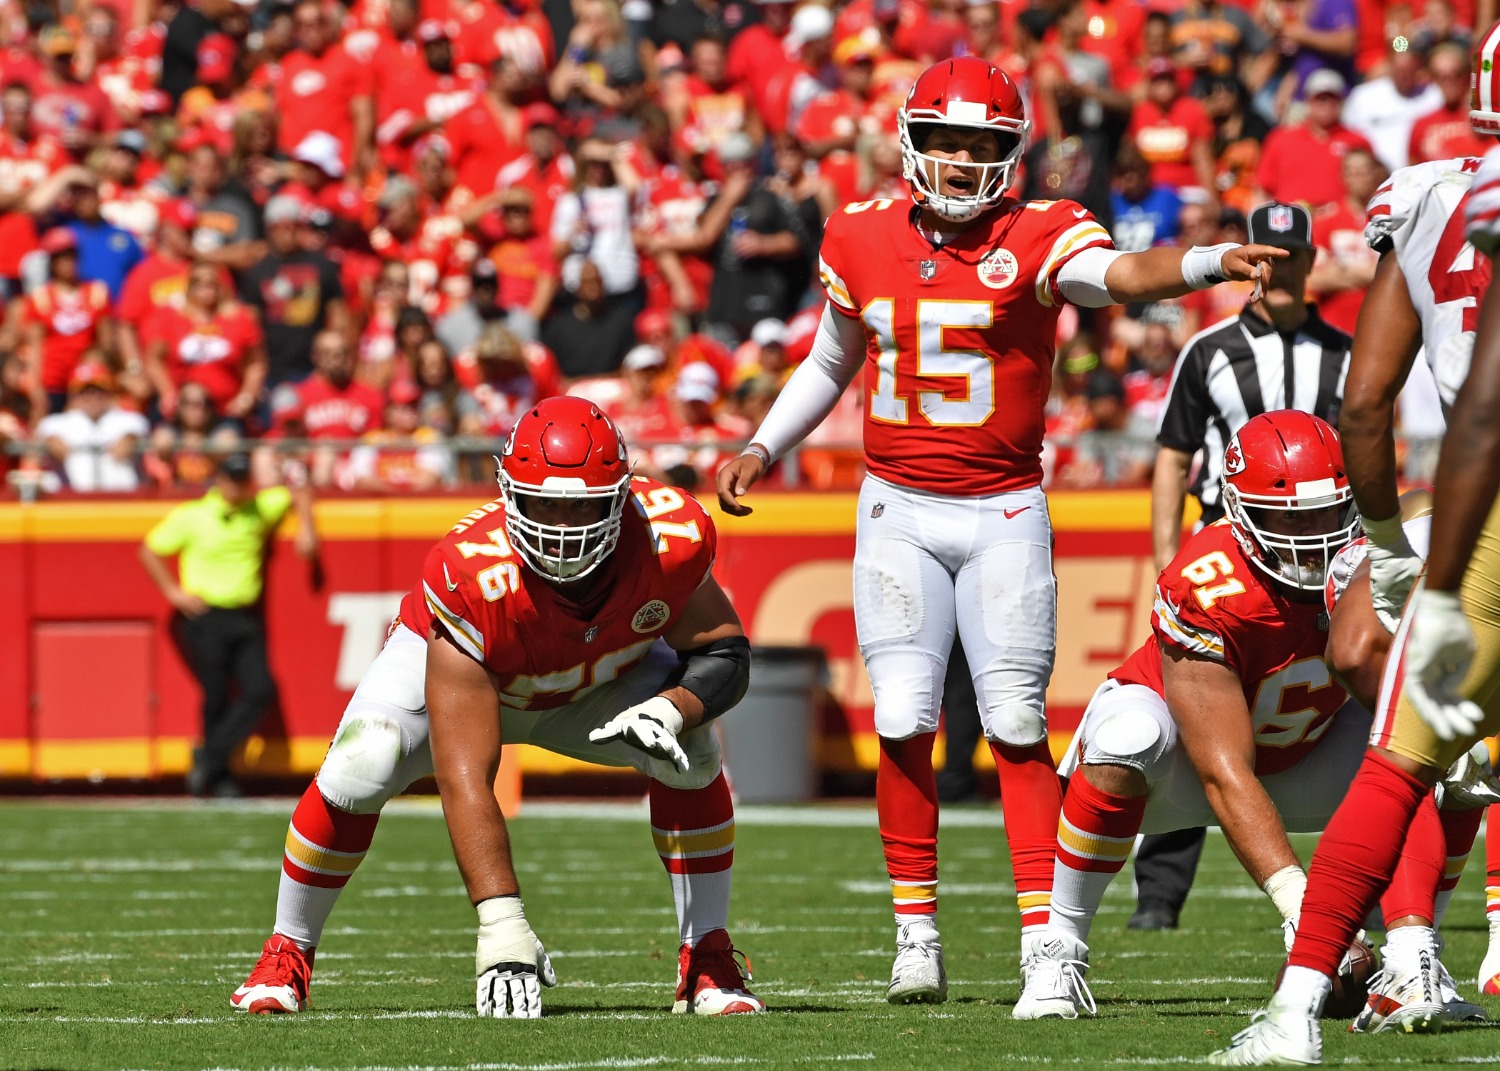 Patrick Mahomes just got a $2 million upgrade from the Chiefs in the form of Kelechi Osemele, who will replace Laurent Duvernay-Tardif.